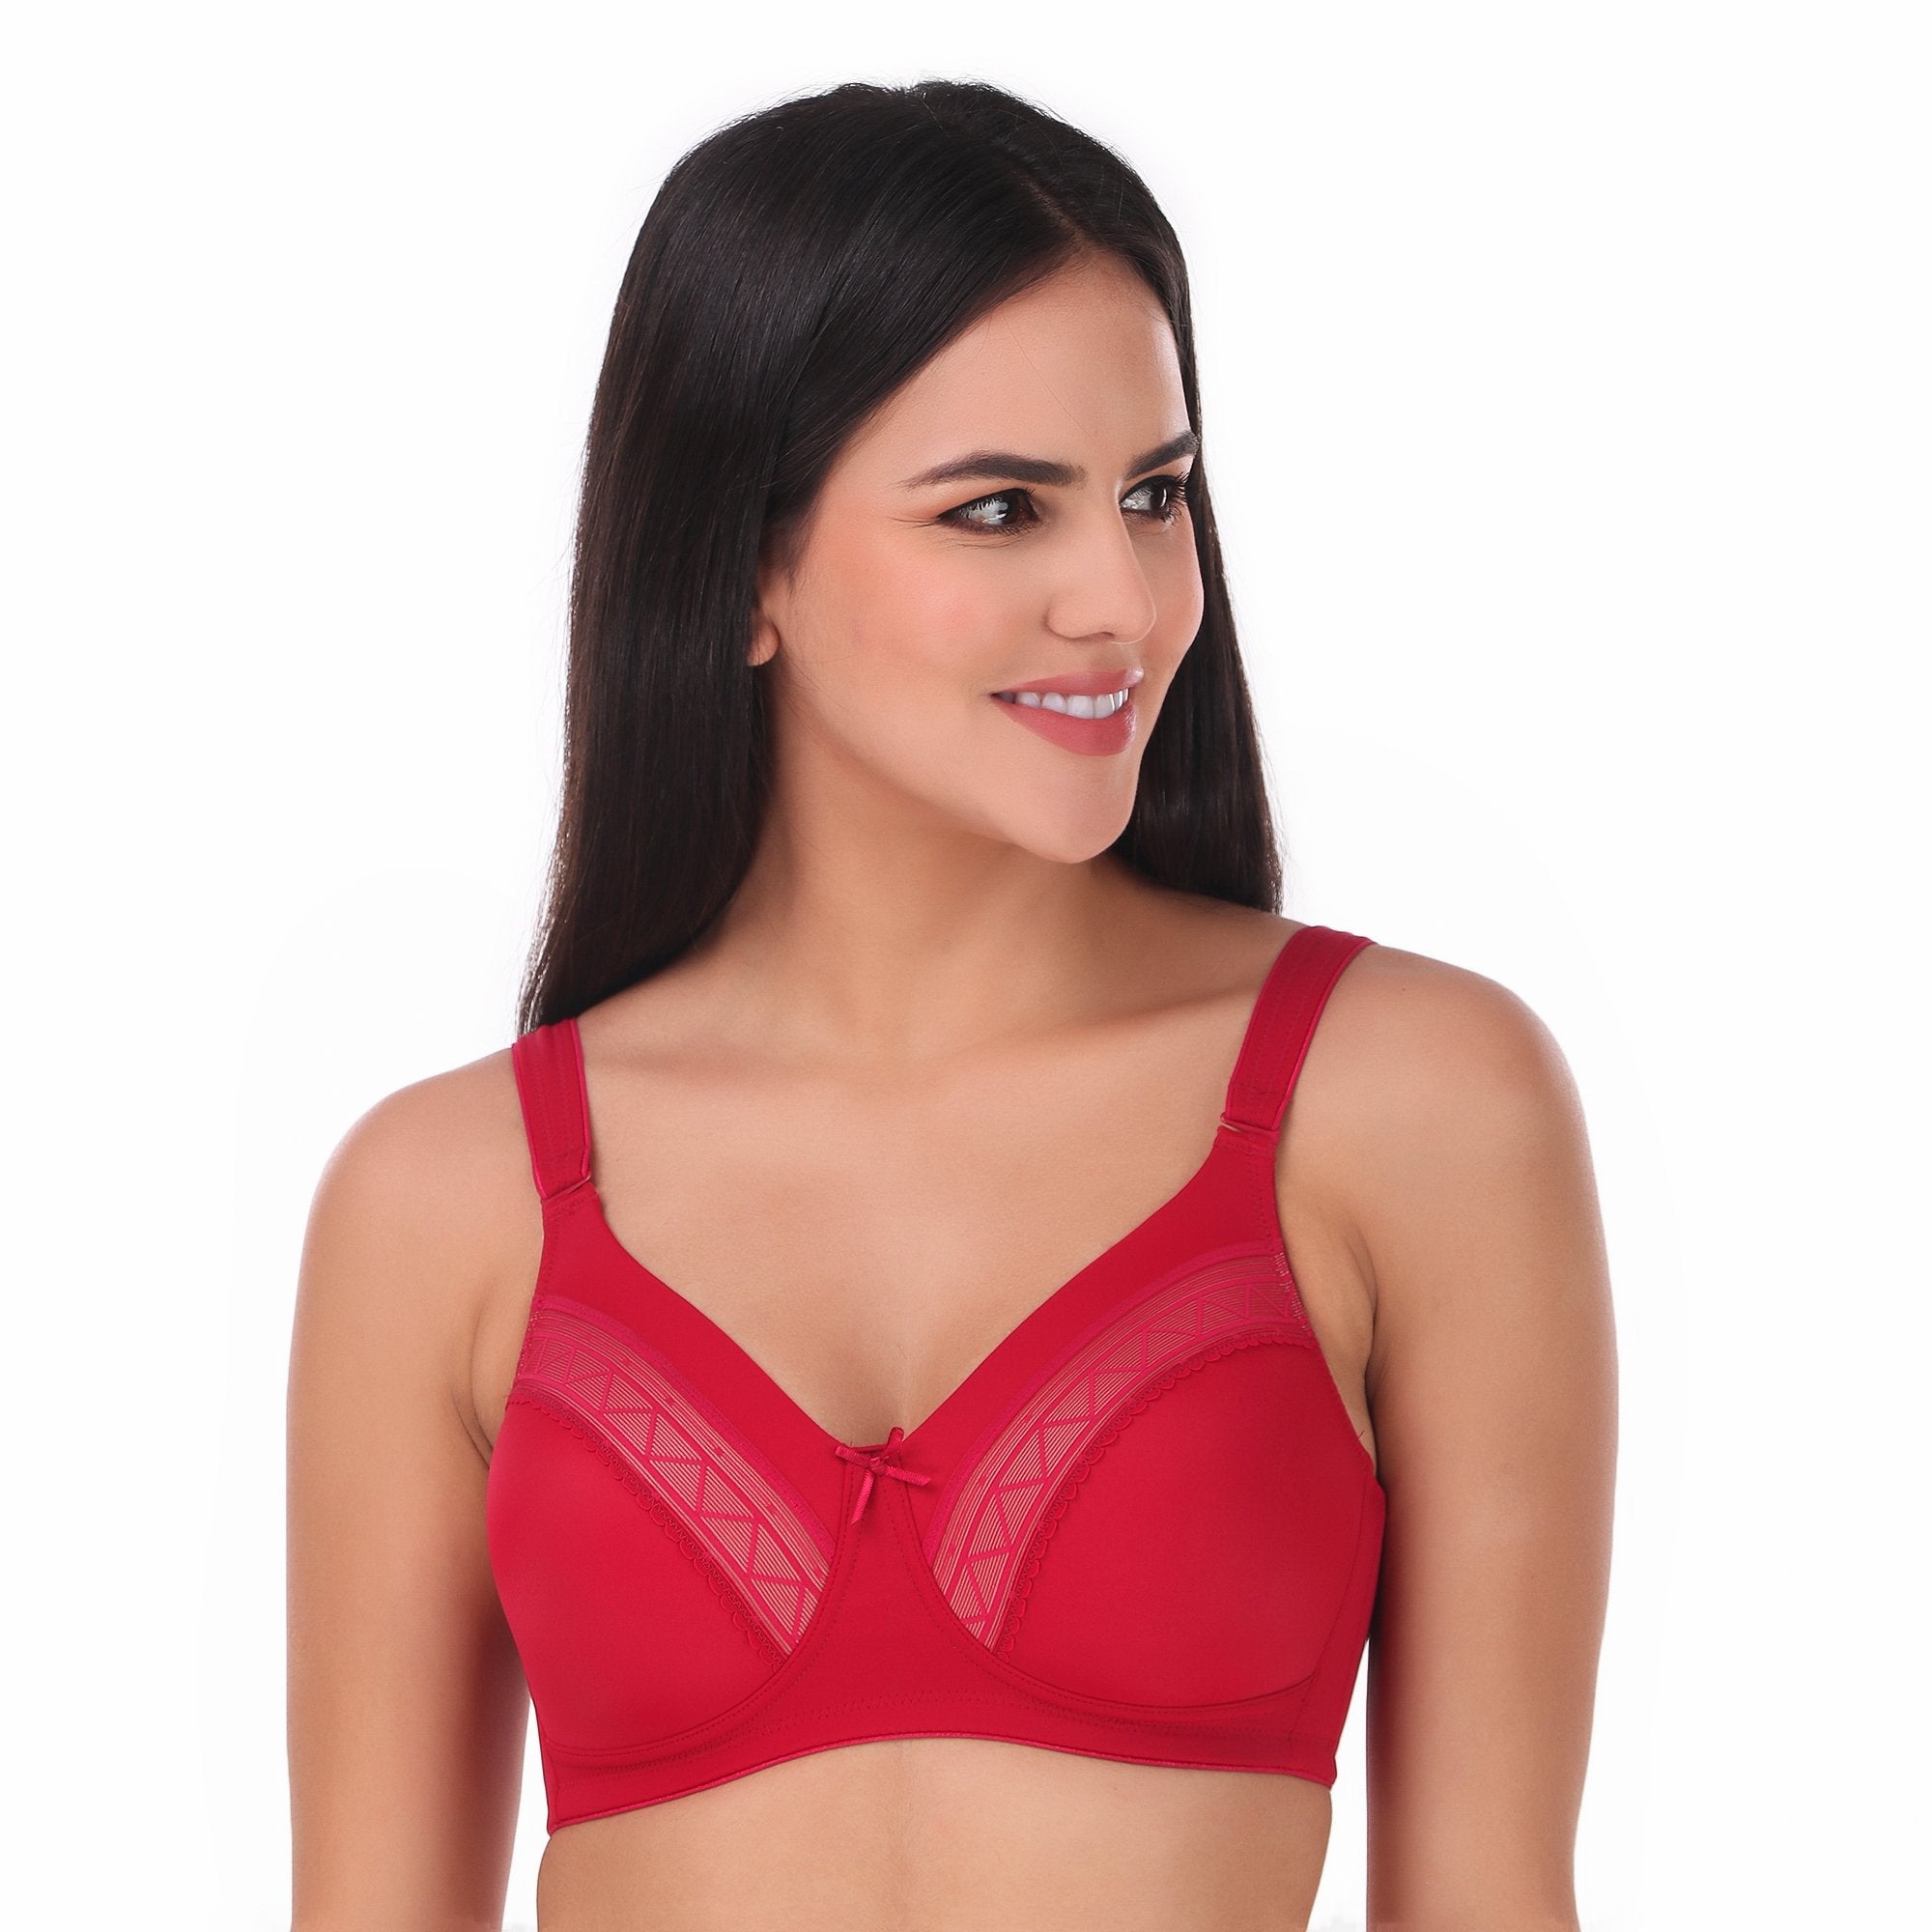 ENAMOR-BB03 TRENDY FIT STRETCH COTTON BEGINNERS BRA WITH ANTIMICROBIAL